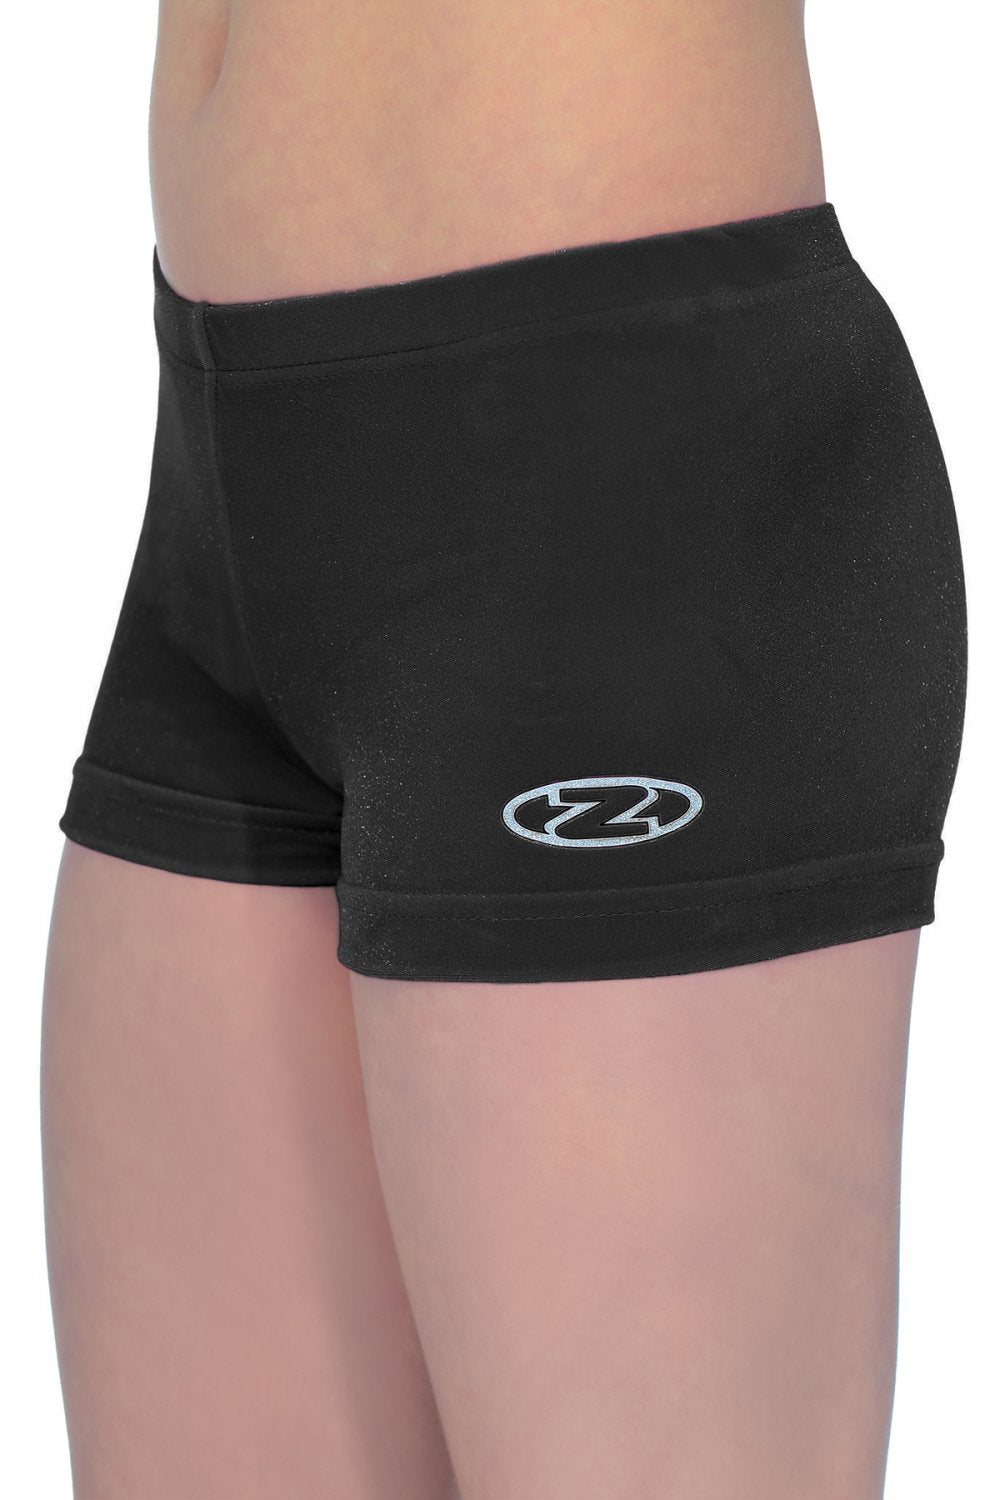 The Zone Adults Smooth Velour Hipster Shorts Z2000